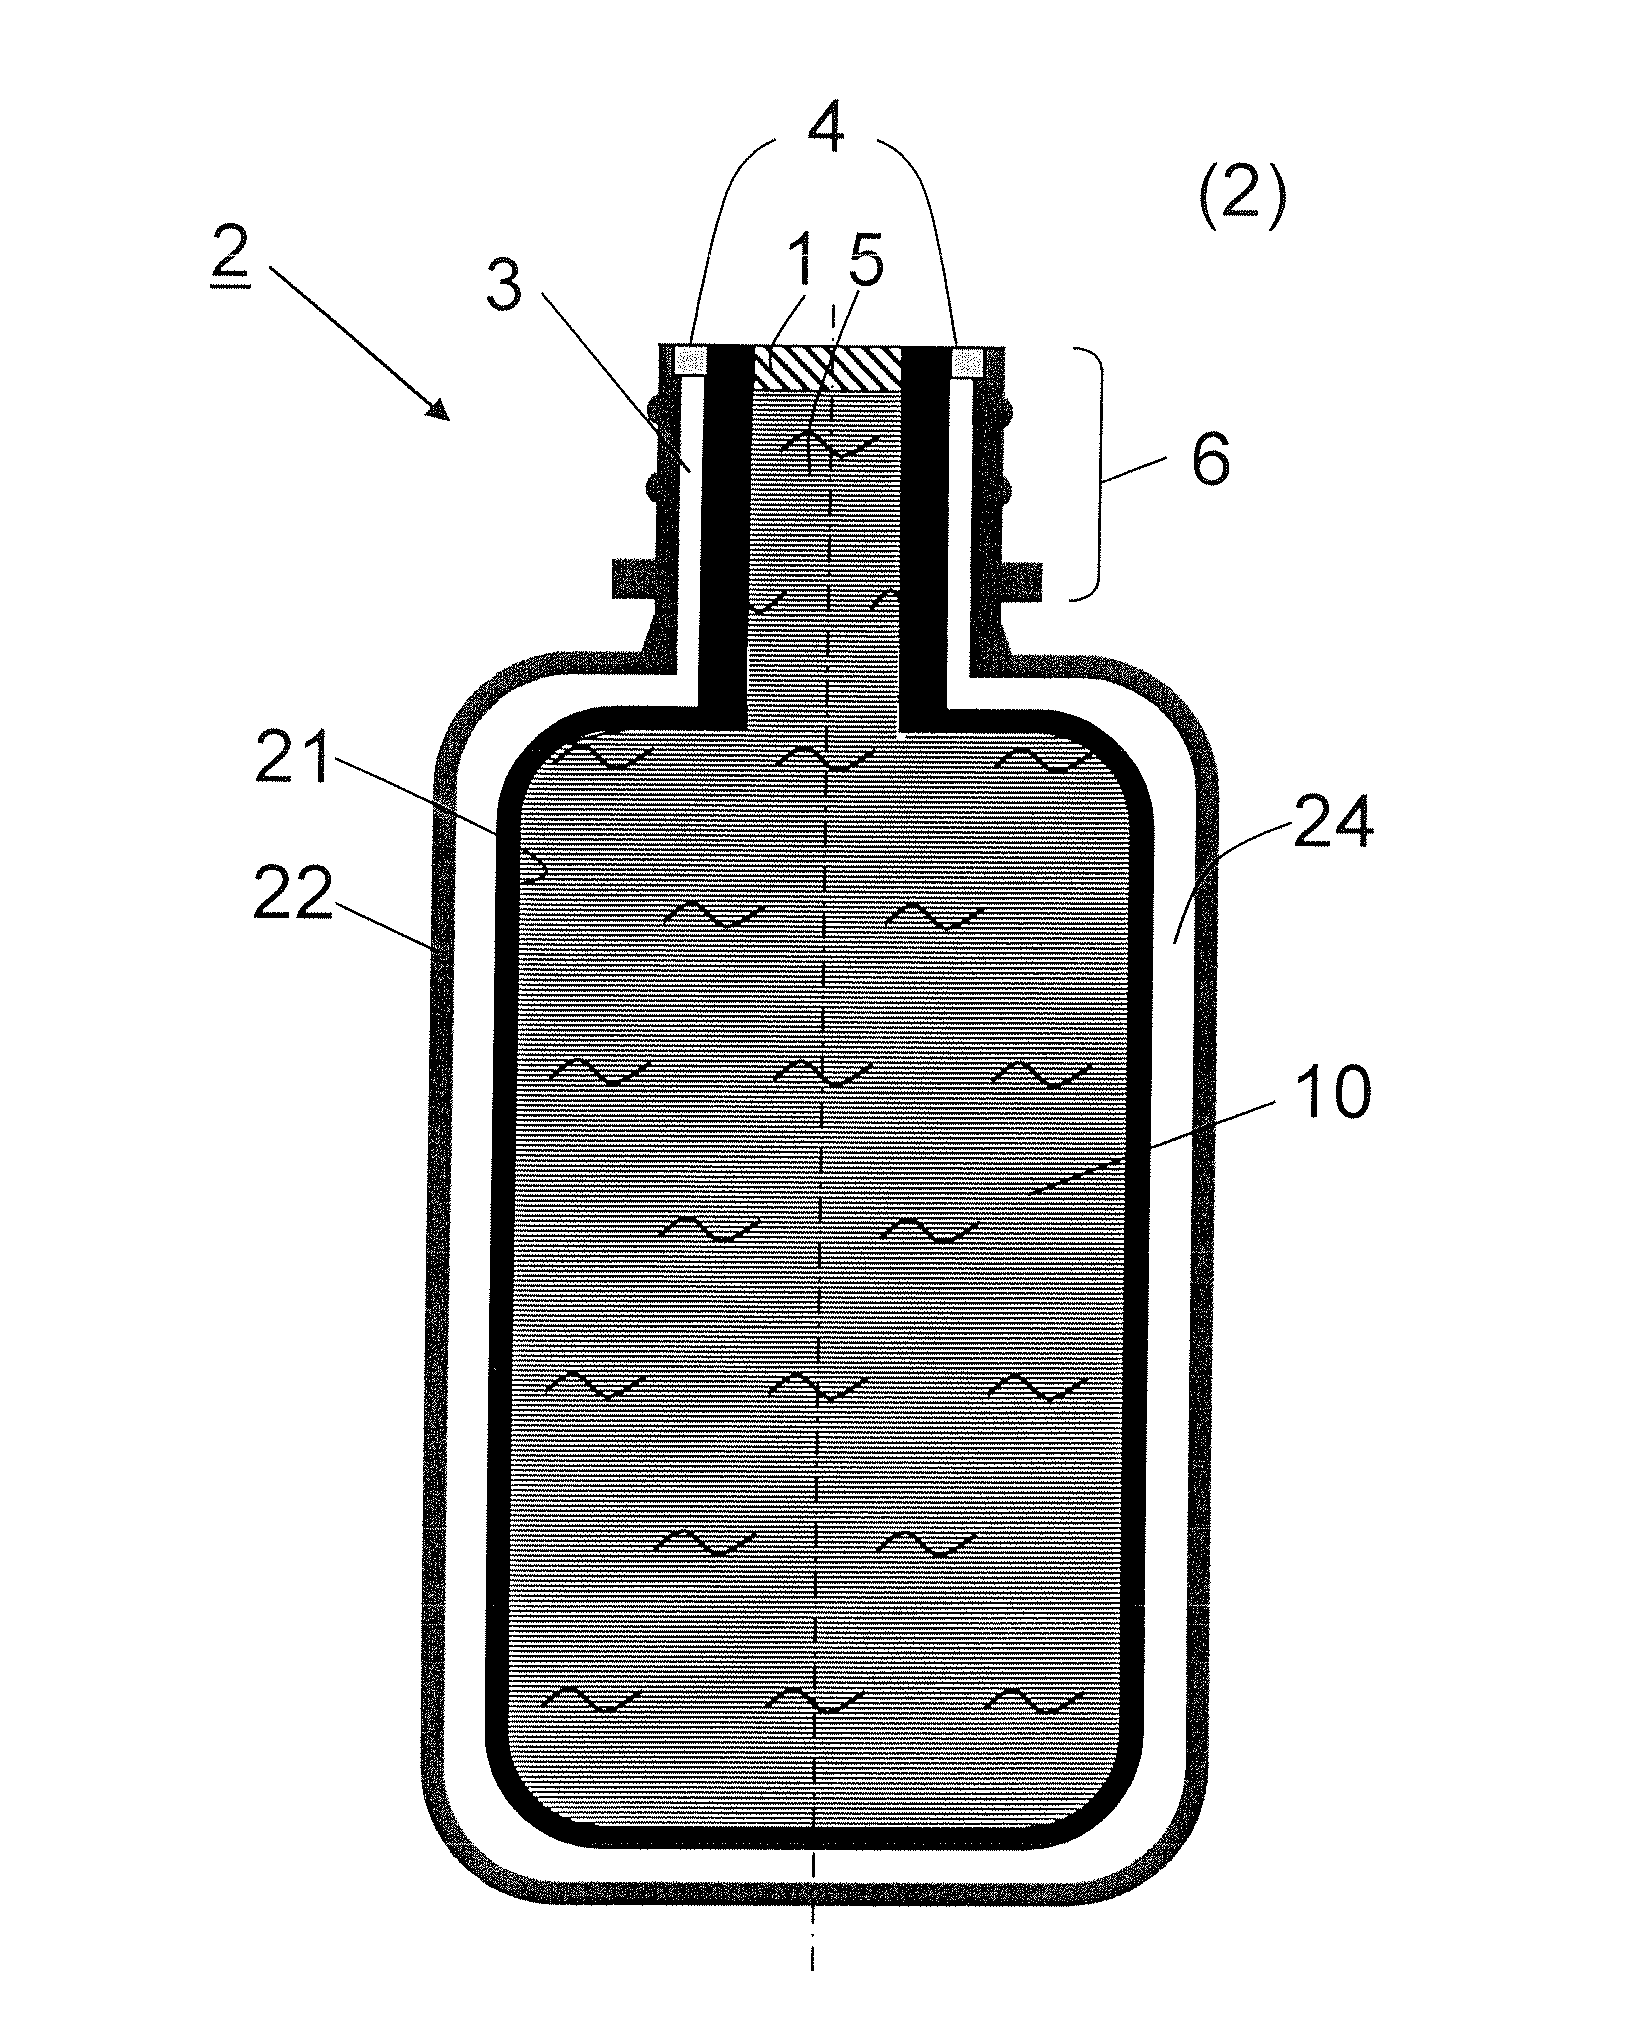 Bag-in-container with prepressurized space between inner bag and outer container